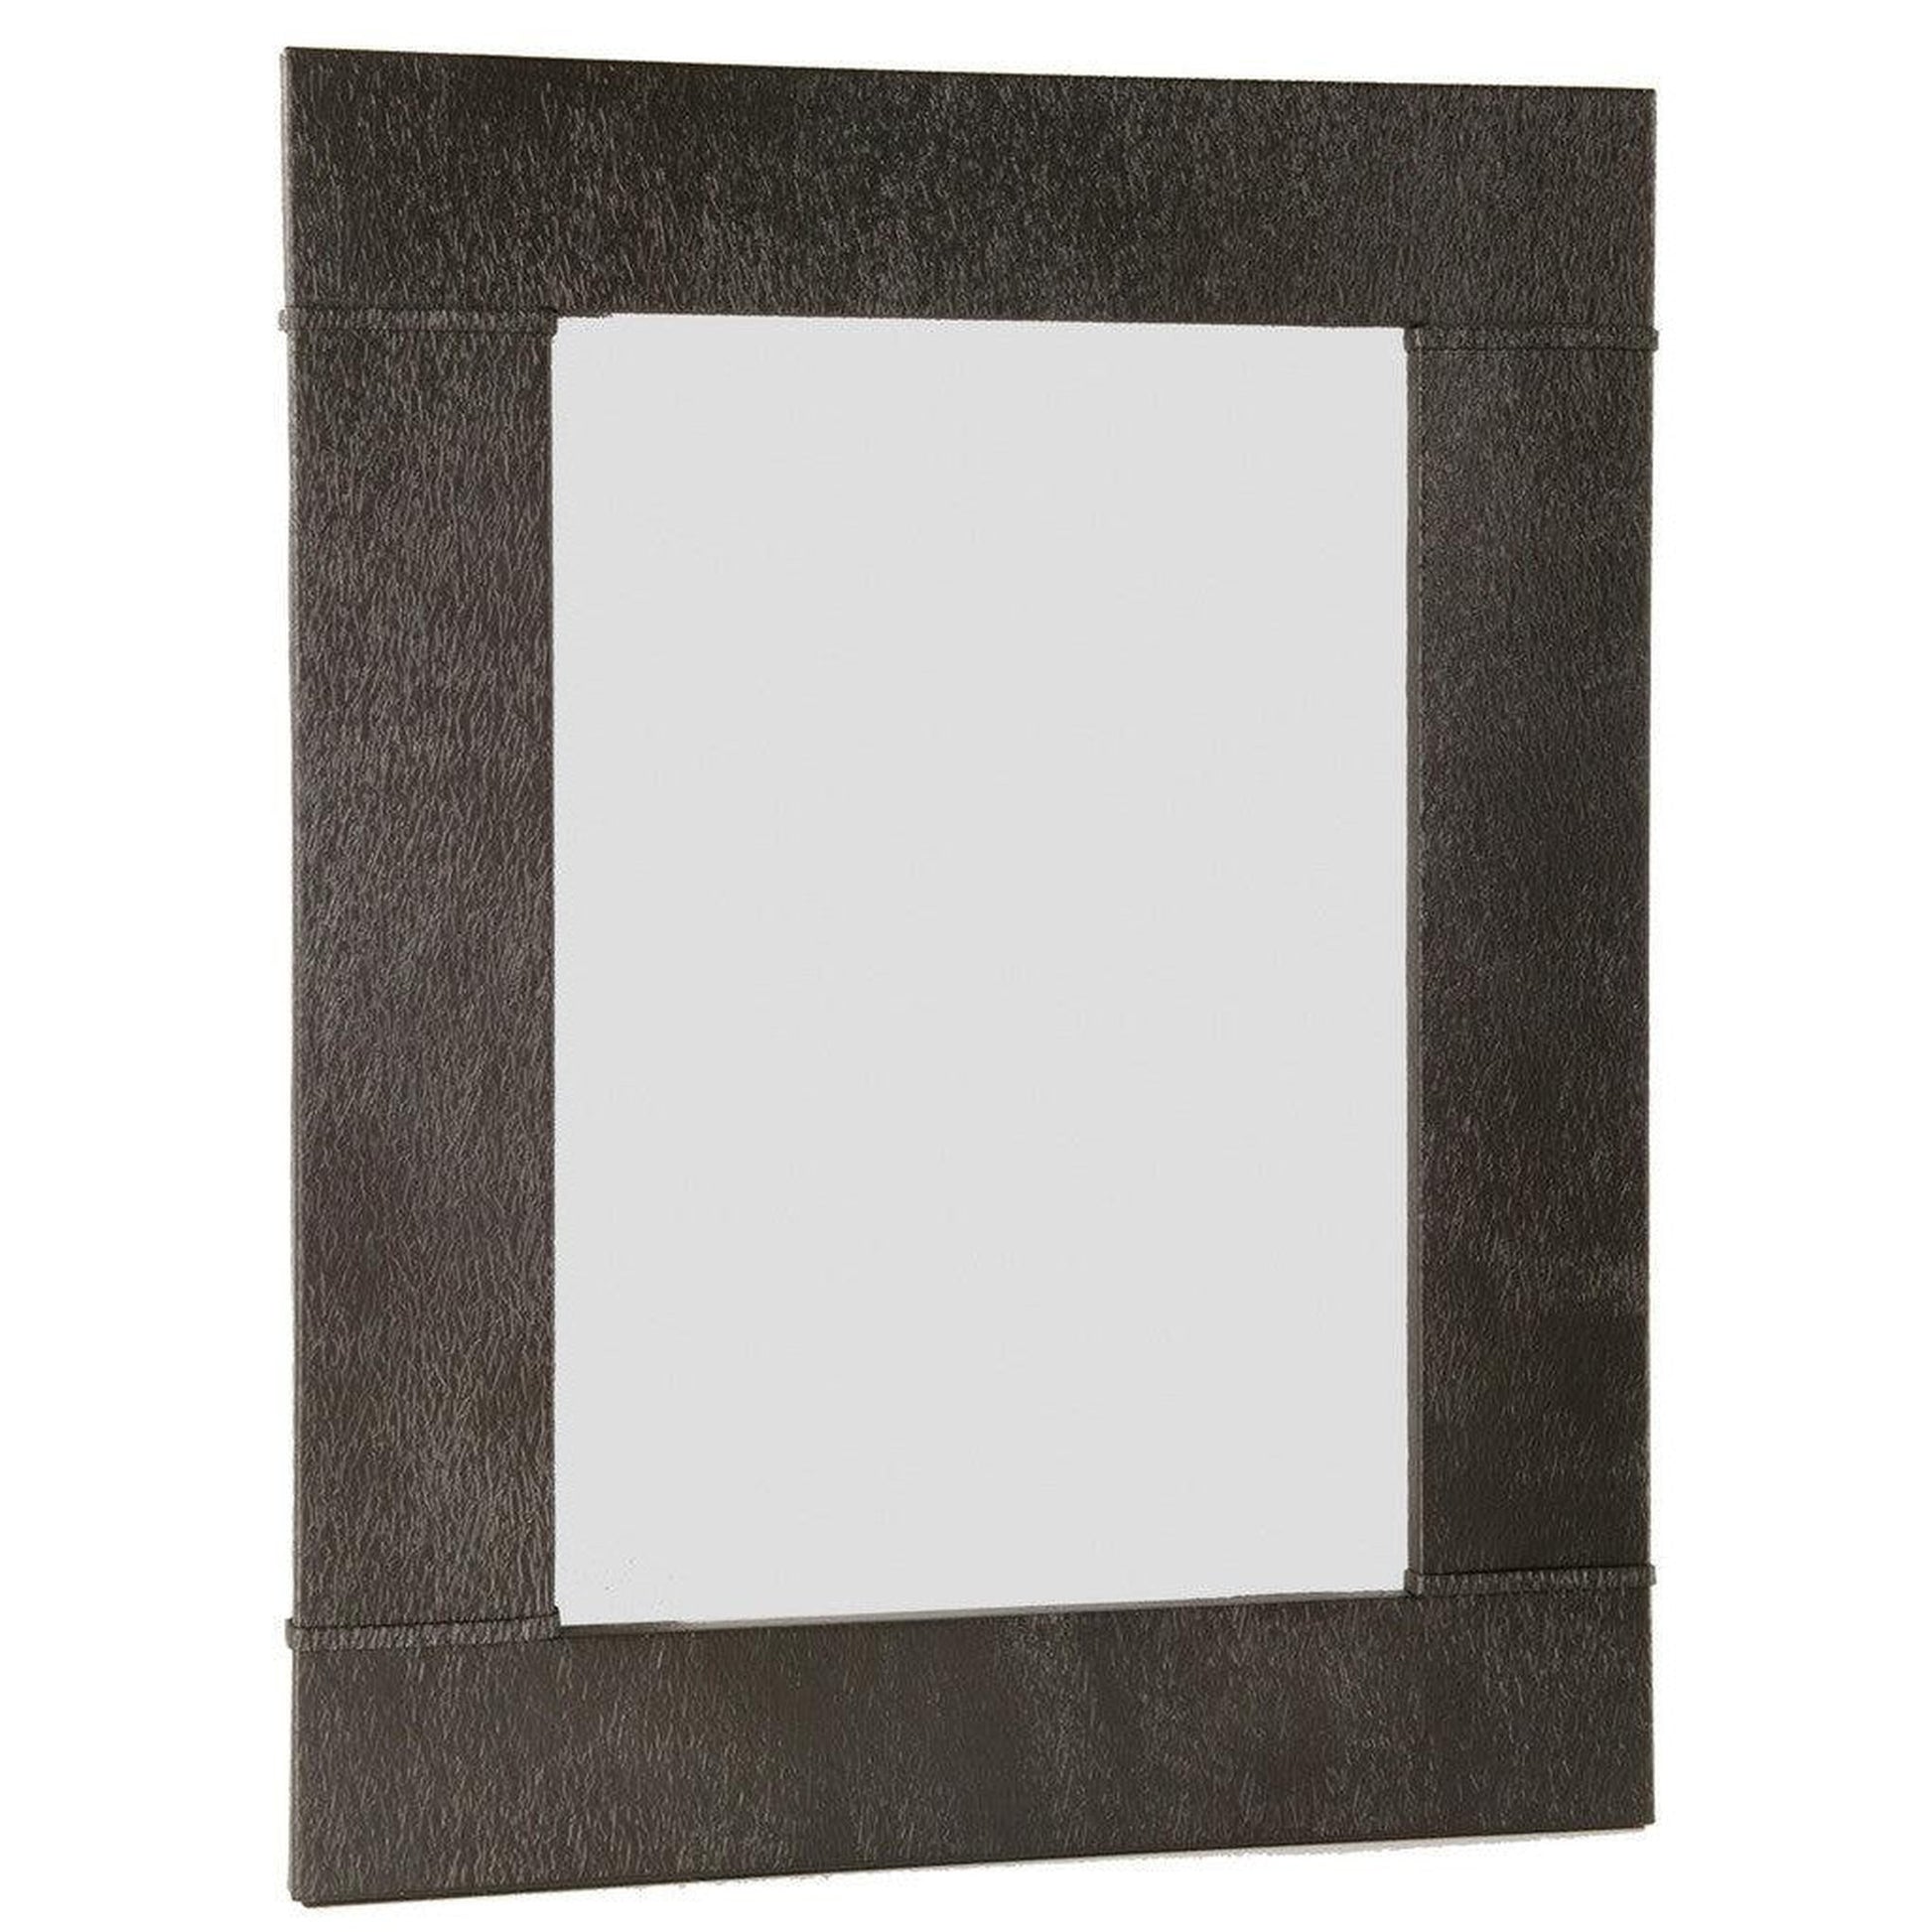 Stone County Ironworks Cedarvale 37" x 45" Large Natural Black Iron Wall Mirror With Gold Iron Accent